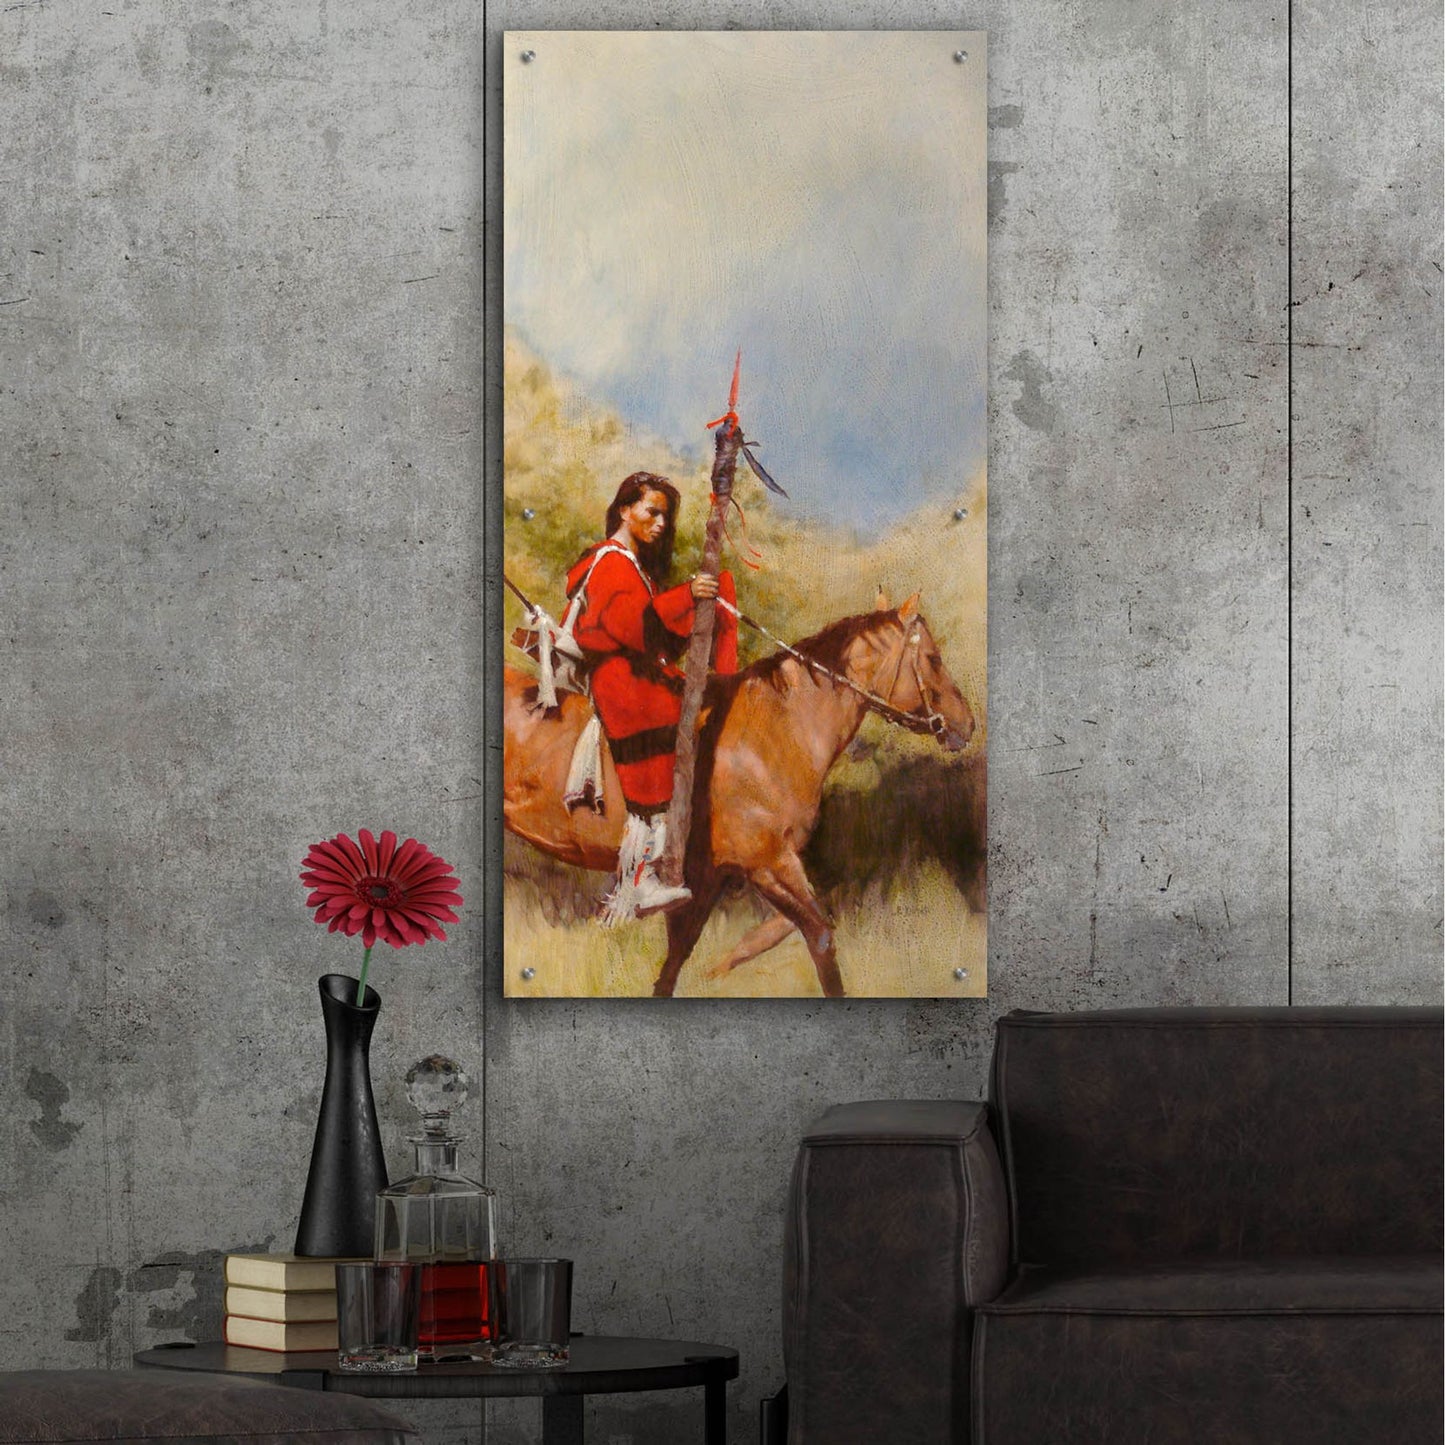 Epic Art 'Horse And Rider At A Walk' by J. E. Knauf, Acrylic Glass Wall Art,24x48